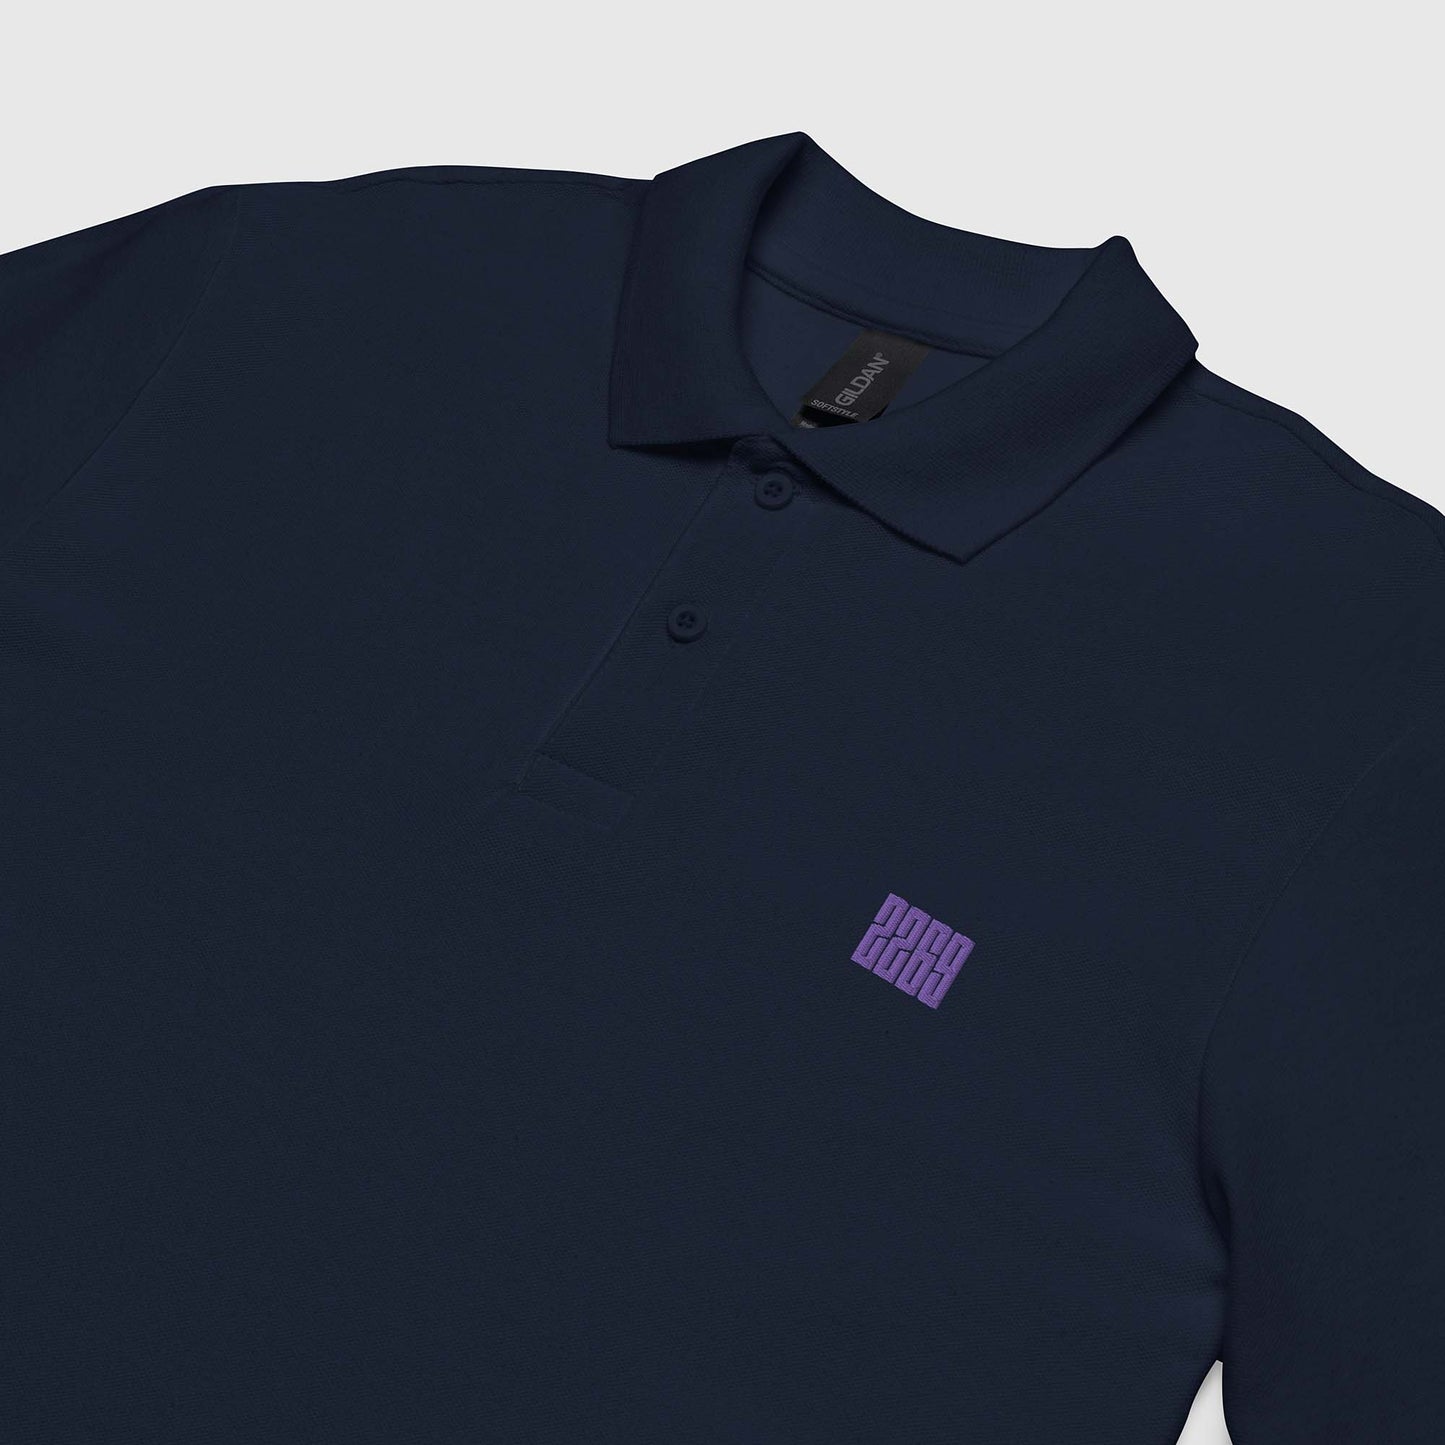 Unisex navy pique polo shirt with embroidered 2269 logo